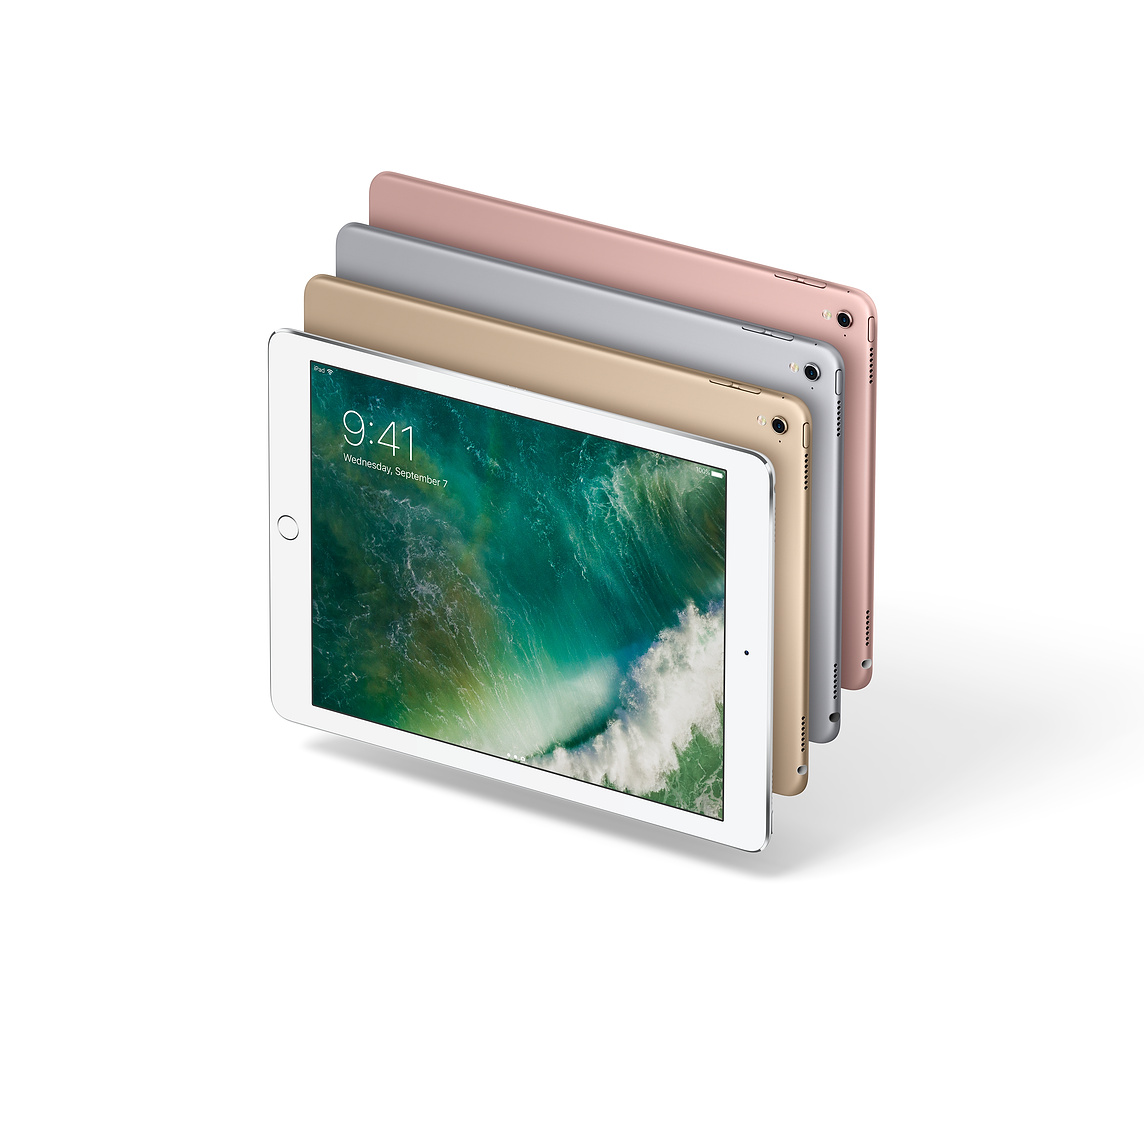 Apple continues to offer refurbished 9″ iPad Pros starting at only $469